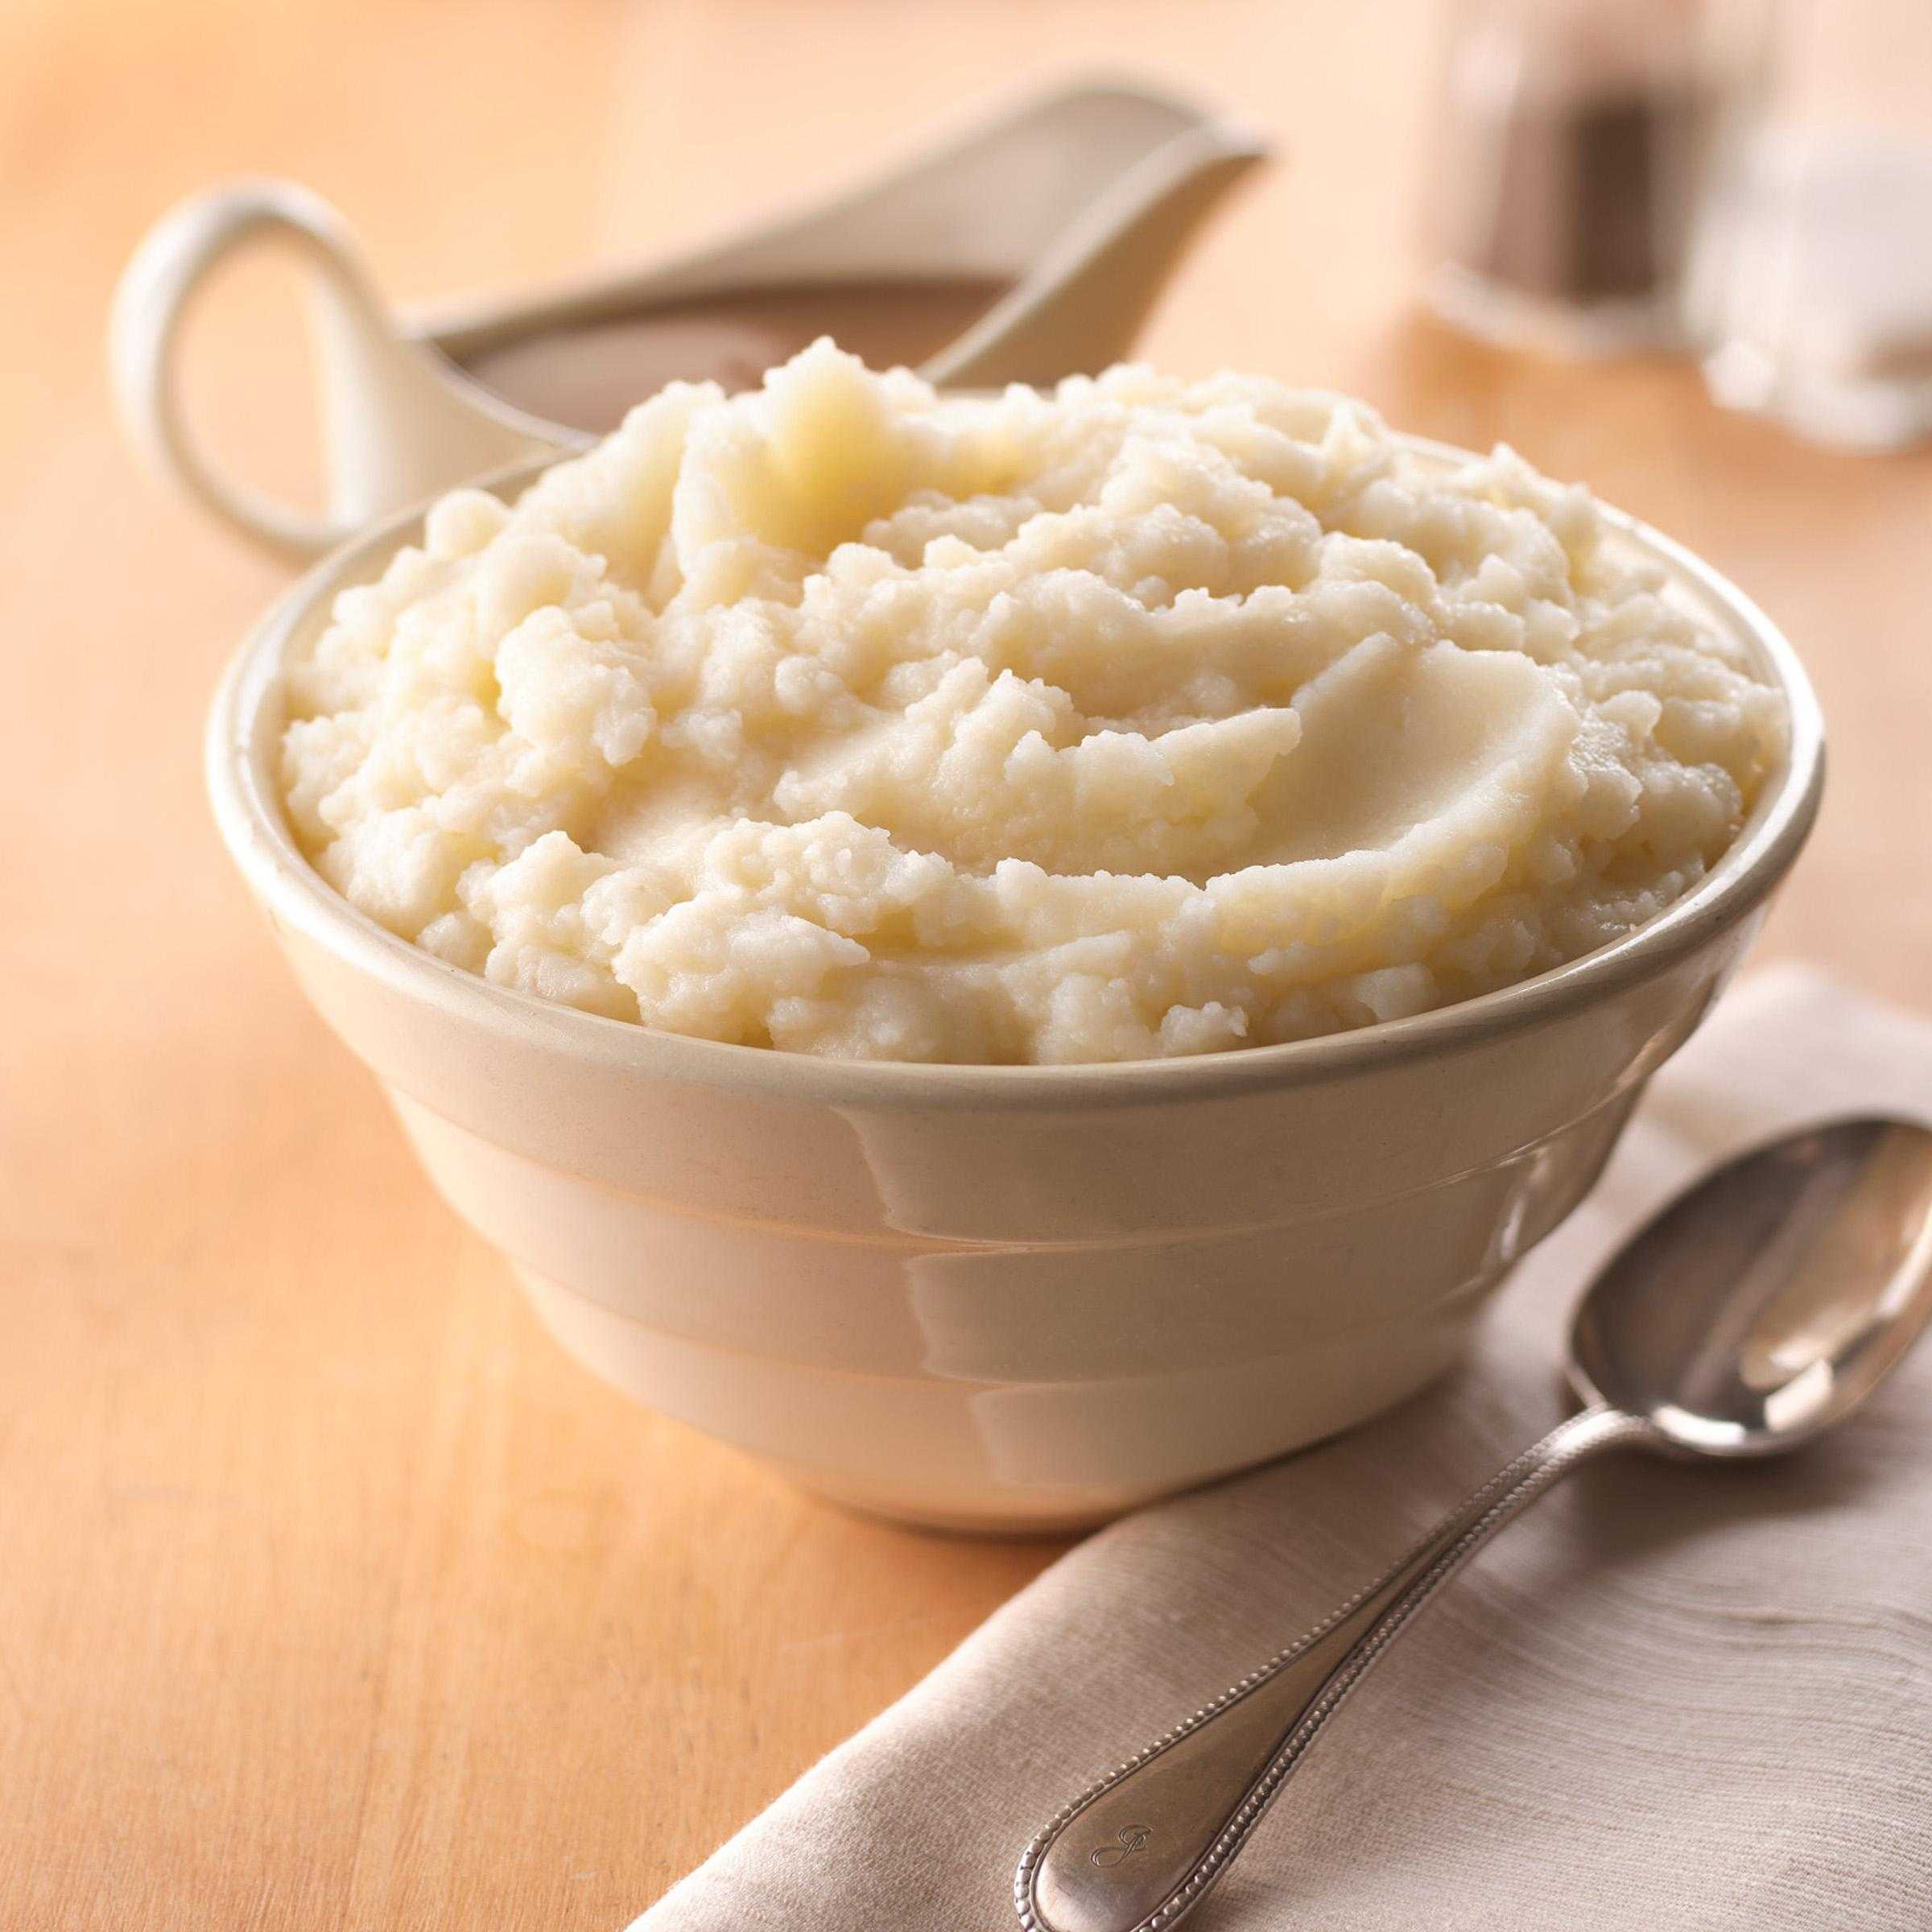 Simply Potatoes® Refrigerated Mashed Potatoes made with peeled russet potatoes, 4/6 Lb Bags